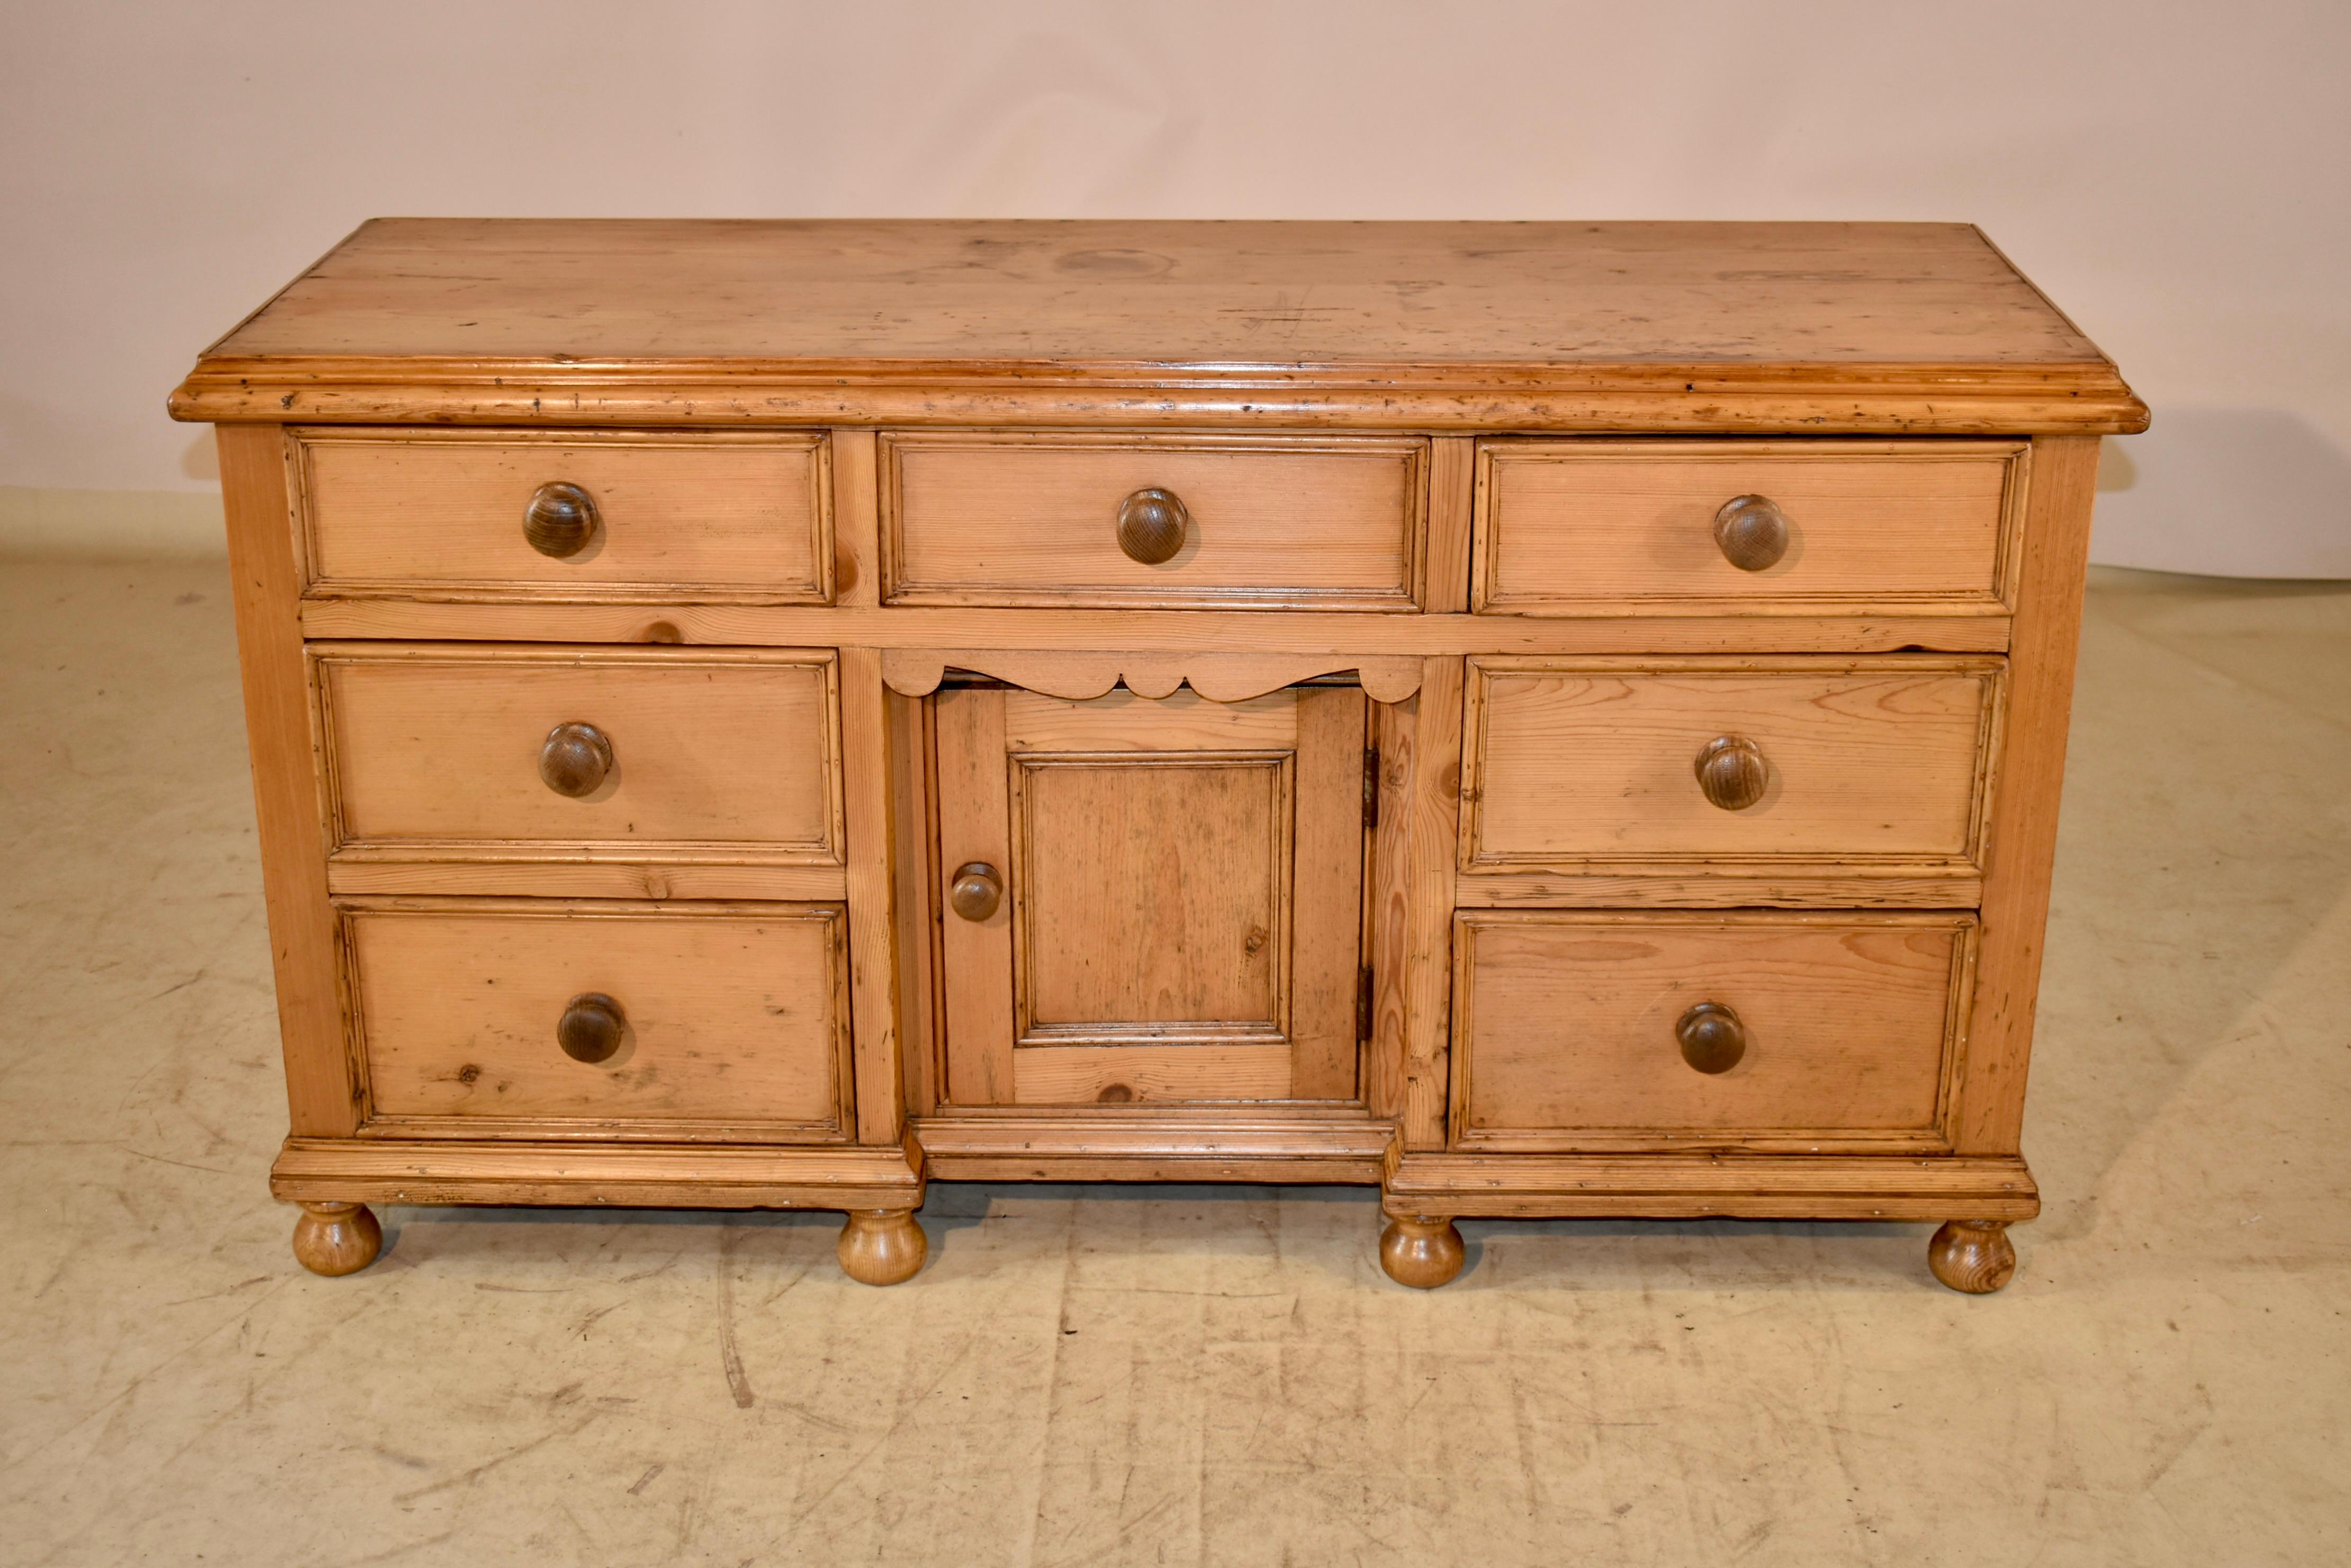 19th century lovely pine dresser base from England.  The top has rich graining, and has loads of character.  The top is surrounded by a shaped molding.  The top follows down to paneled sides and three drawers over two banks of two drawers each,